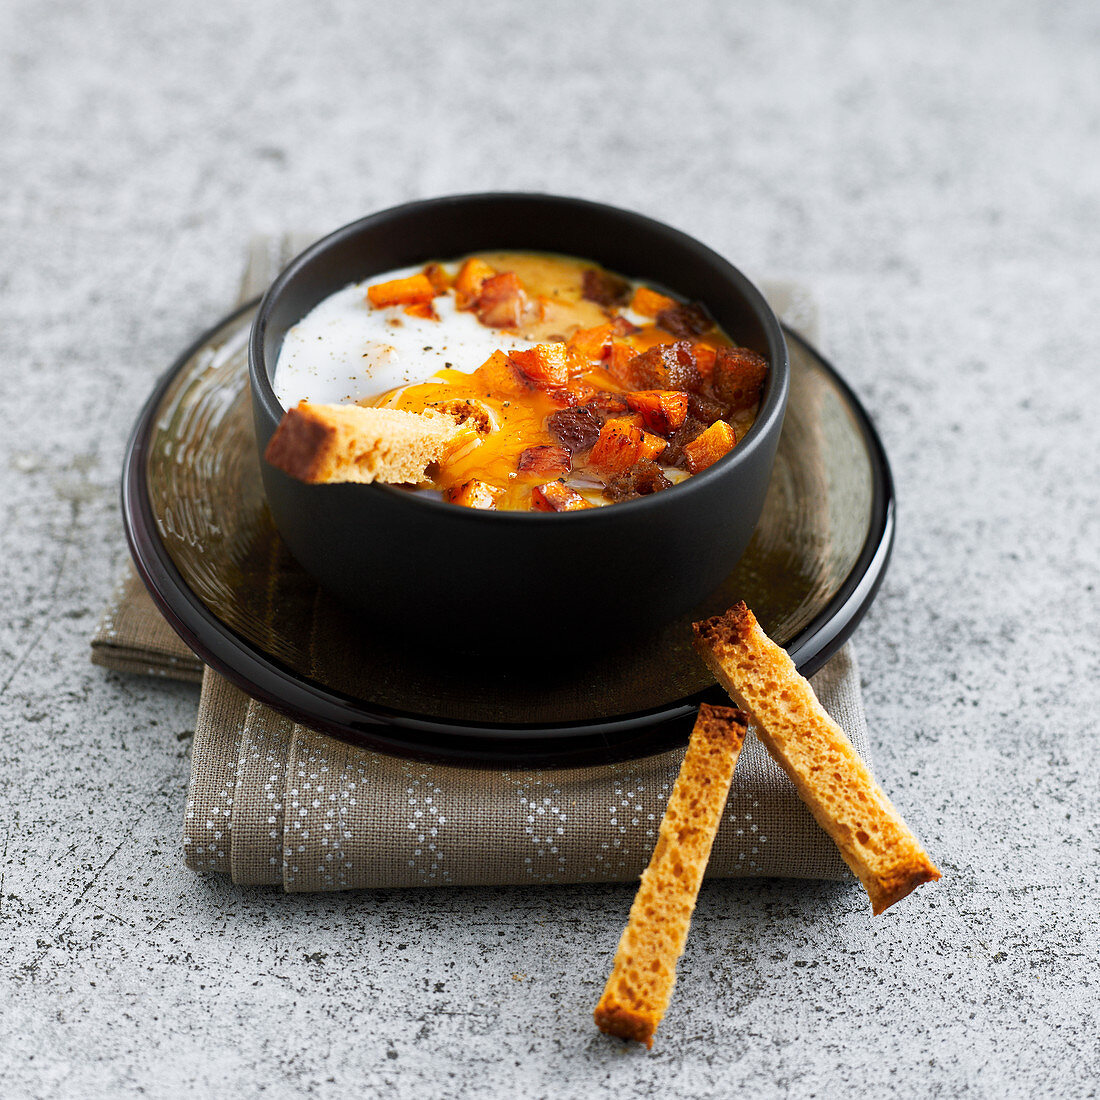 Oeuf cocotte with carrots and spiced bread